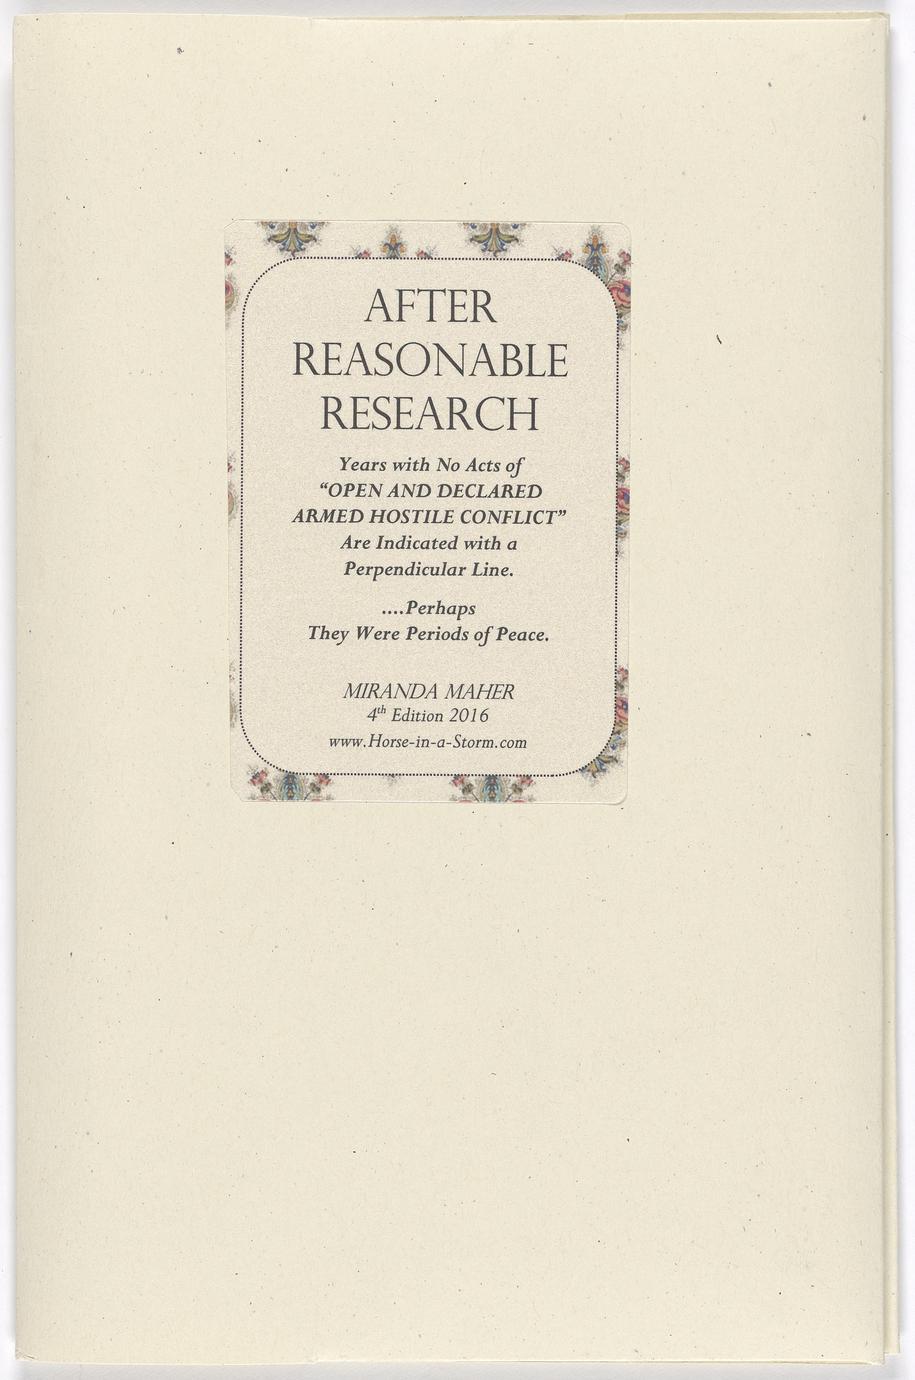 After reasonable research (1 of 5)